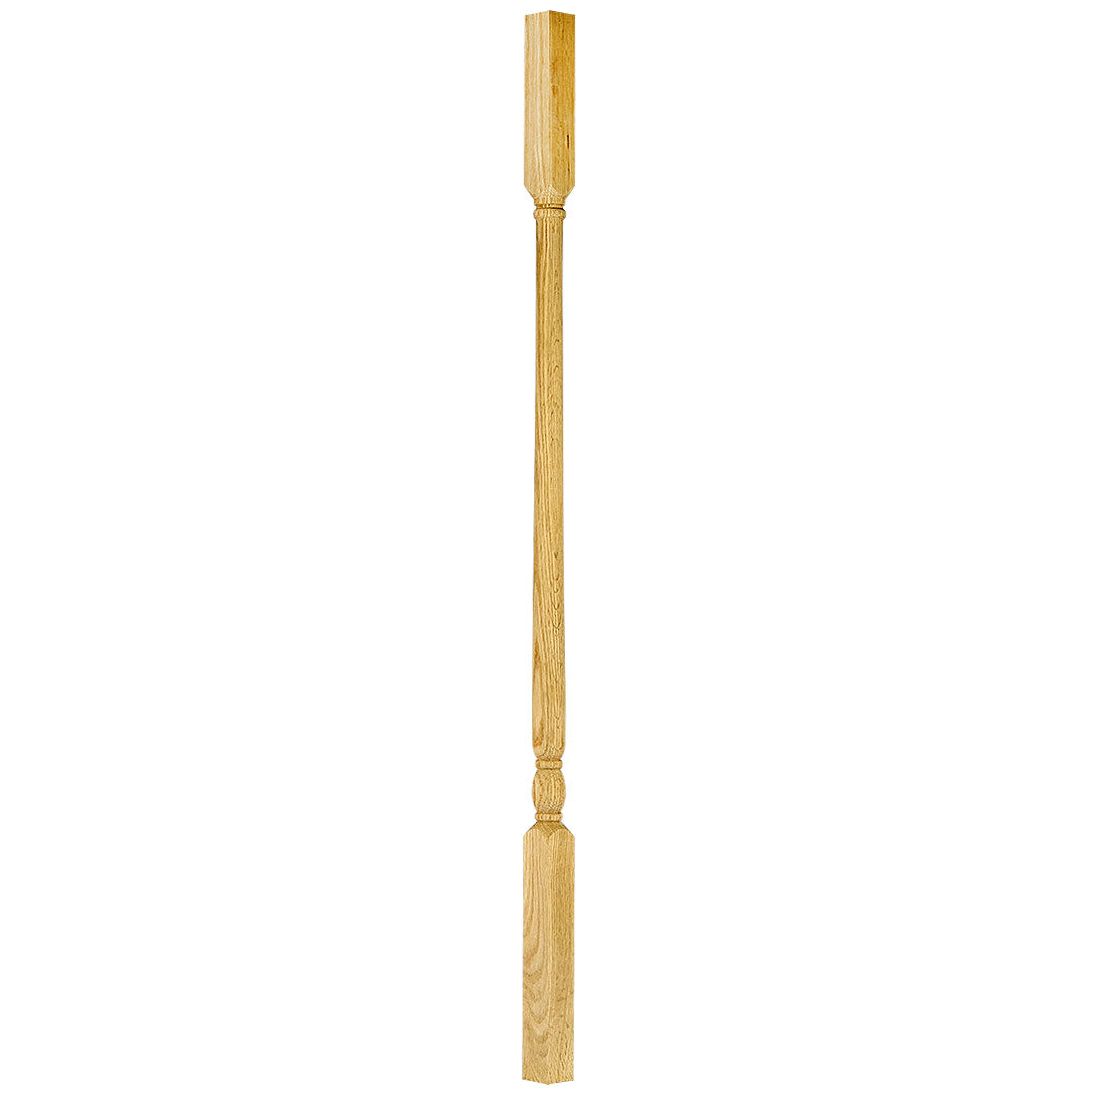 5141 - Wood Baluster - Colonial Square Top - 1-1/4"